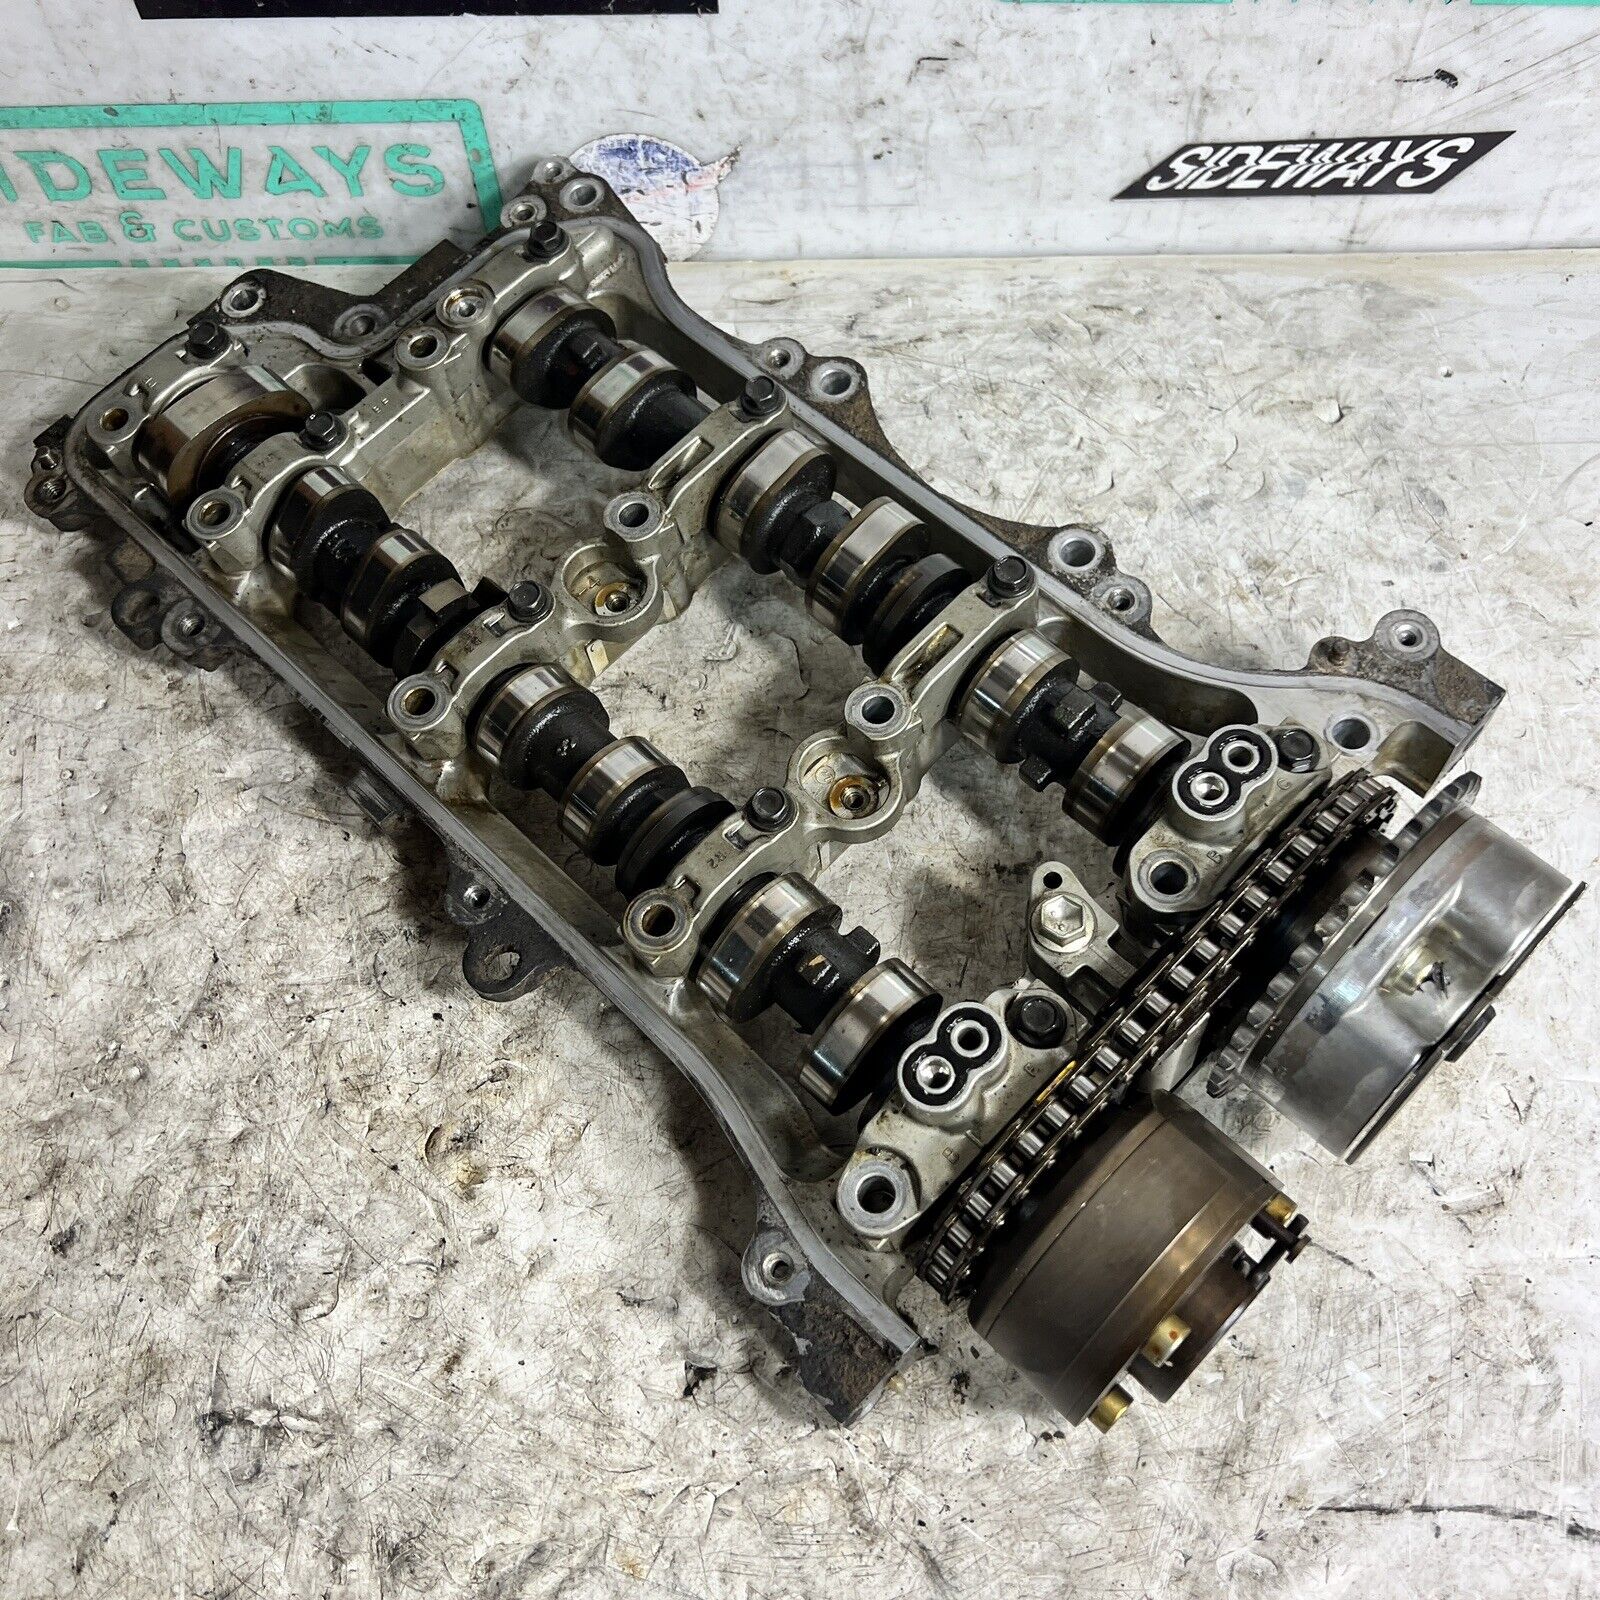 05-13 Lexus IS350 Engine Right Camshafts & Tray 2GR 2GRFSE Intake Exhaust Cam